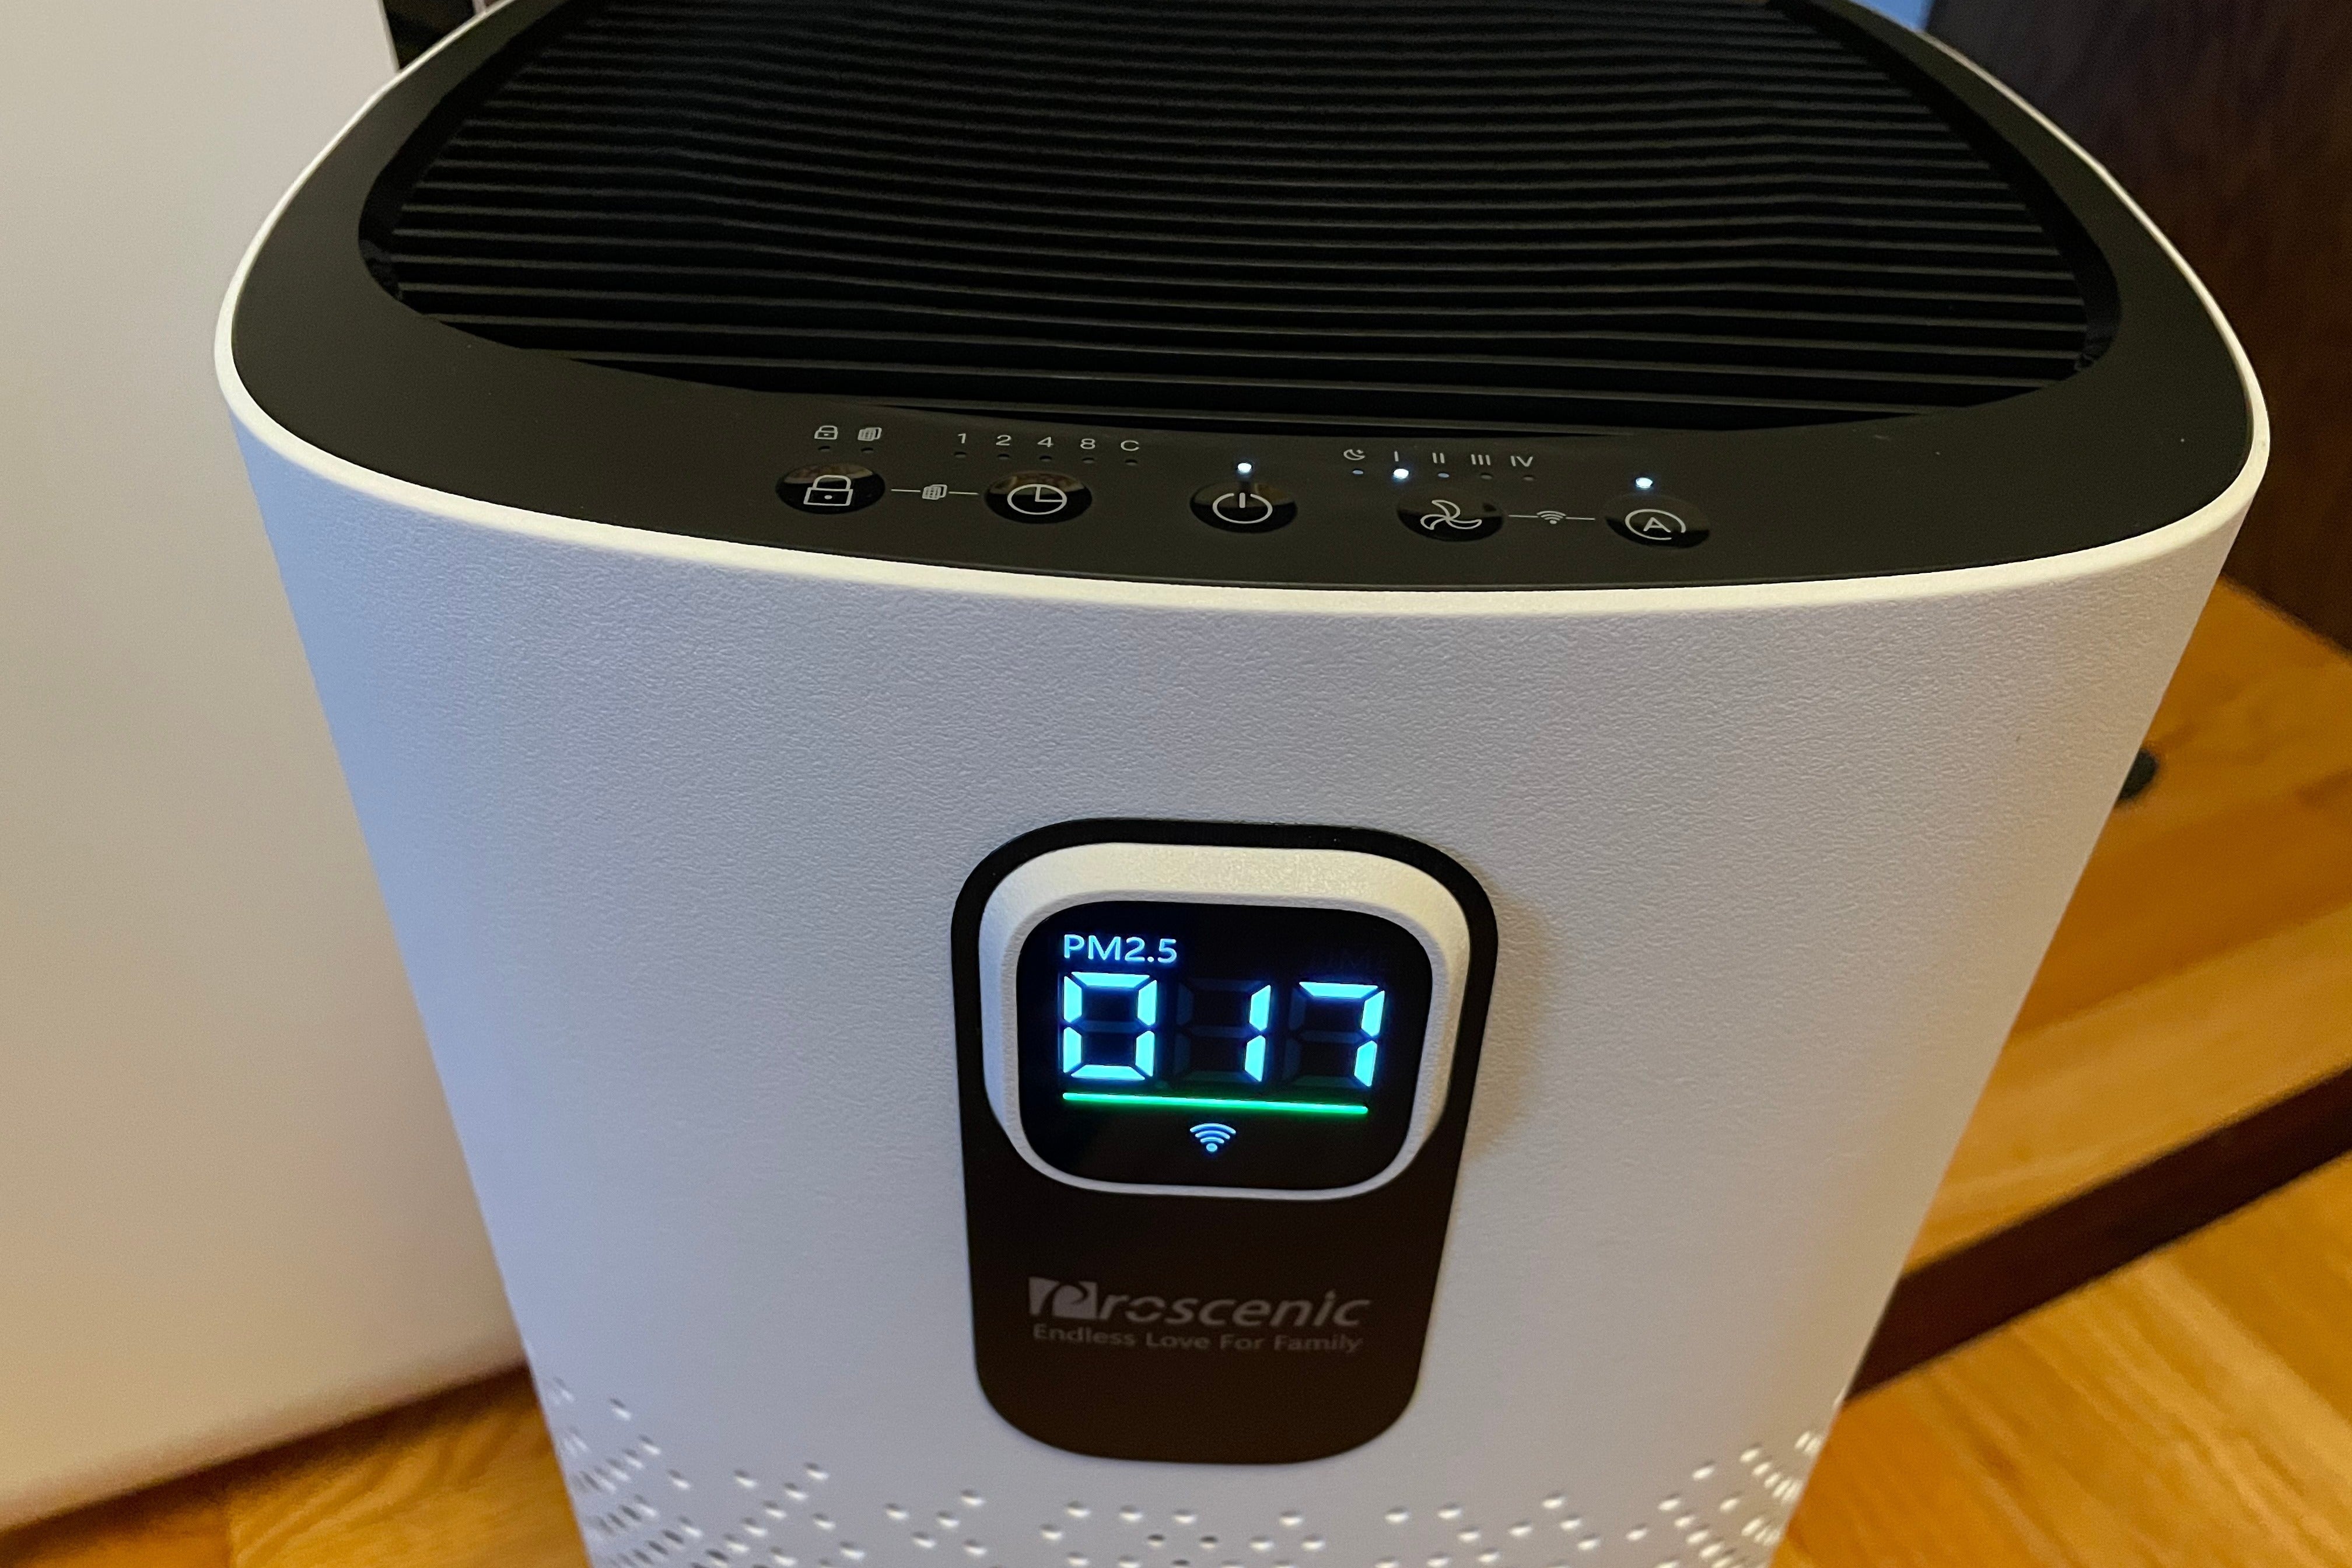 Proscenic A9 air purifier review: Powerful air flow, questionable odor